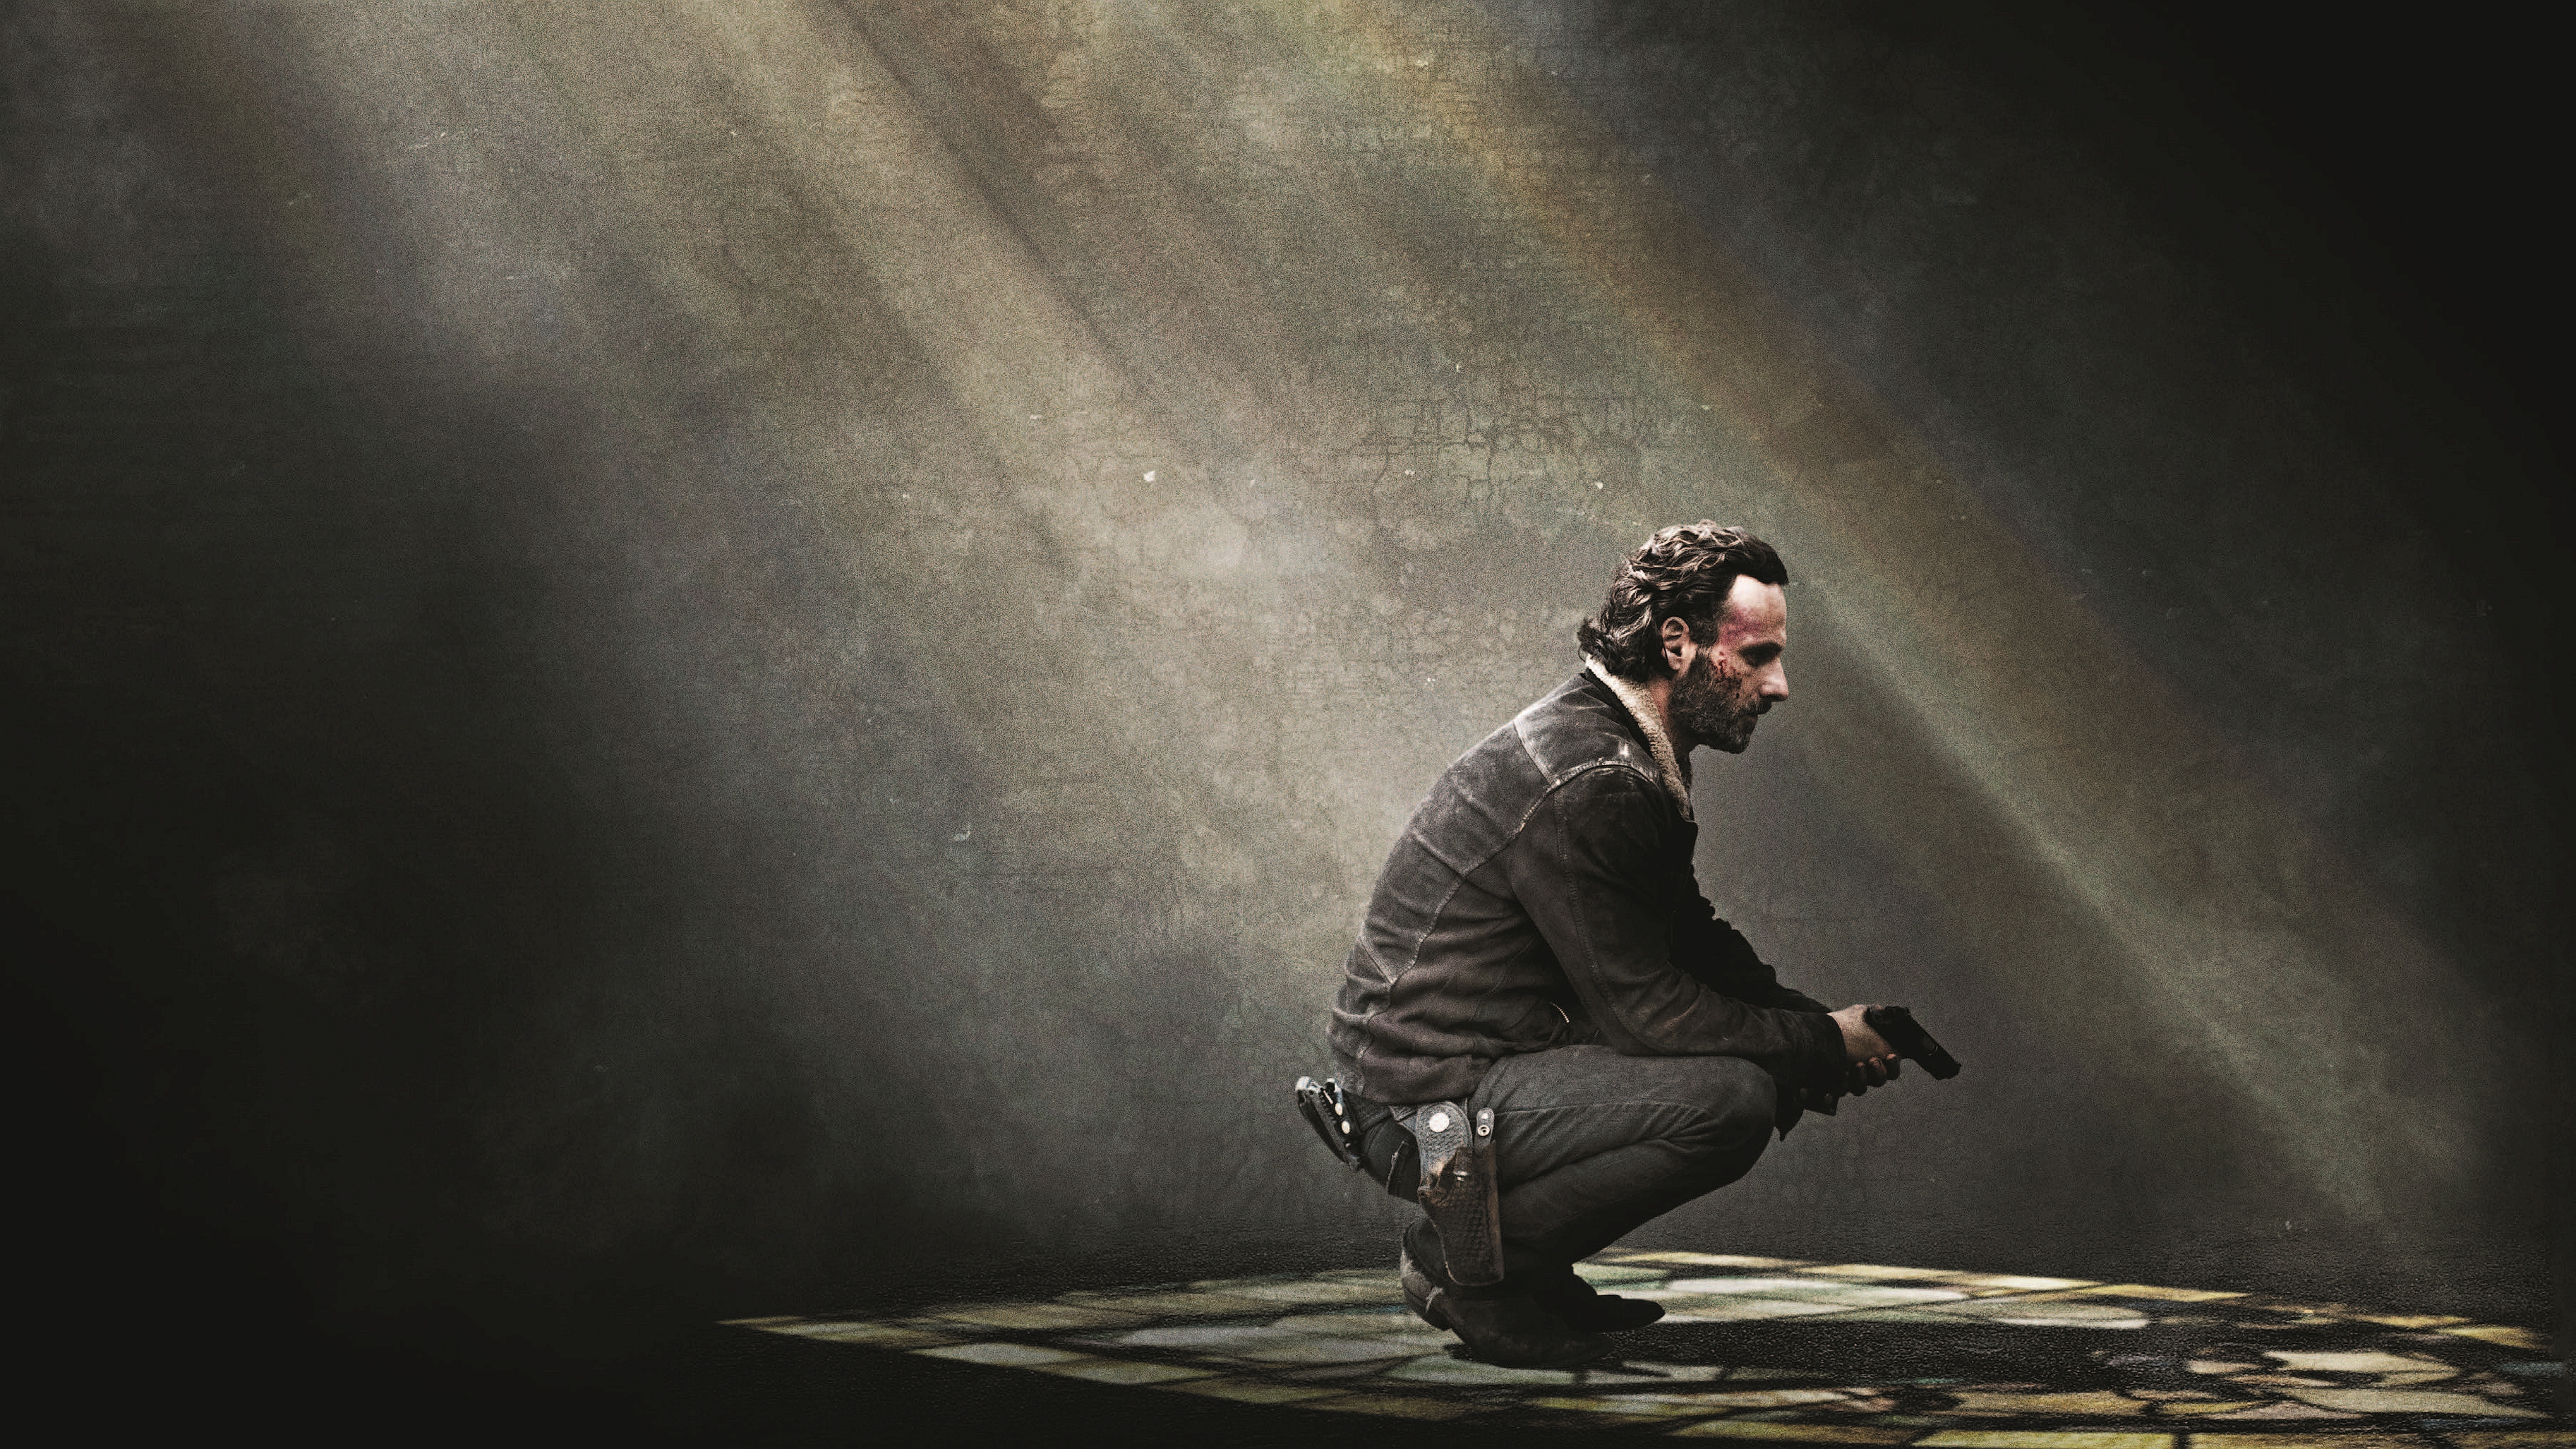 tv show, the walking dead, andrew lincoln, rick grimes wallpaper for mobile